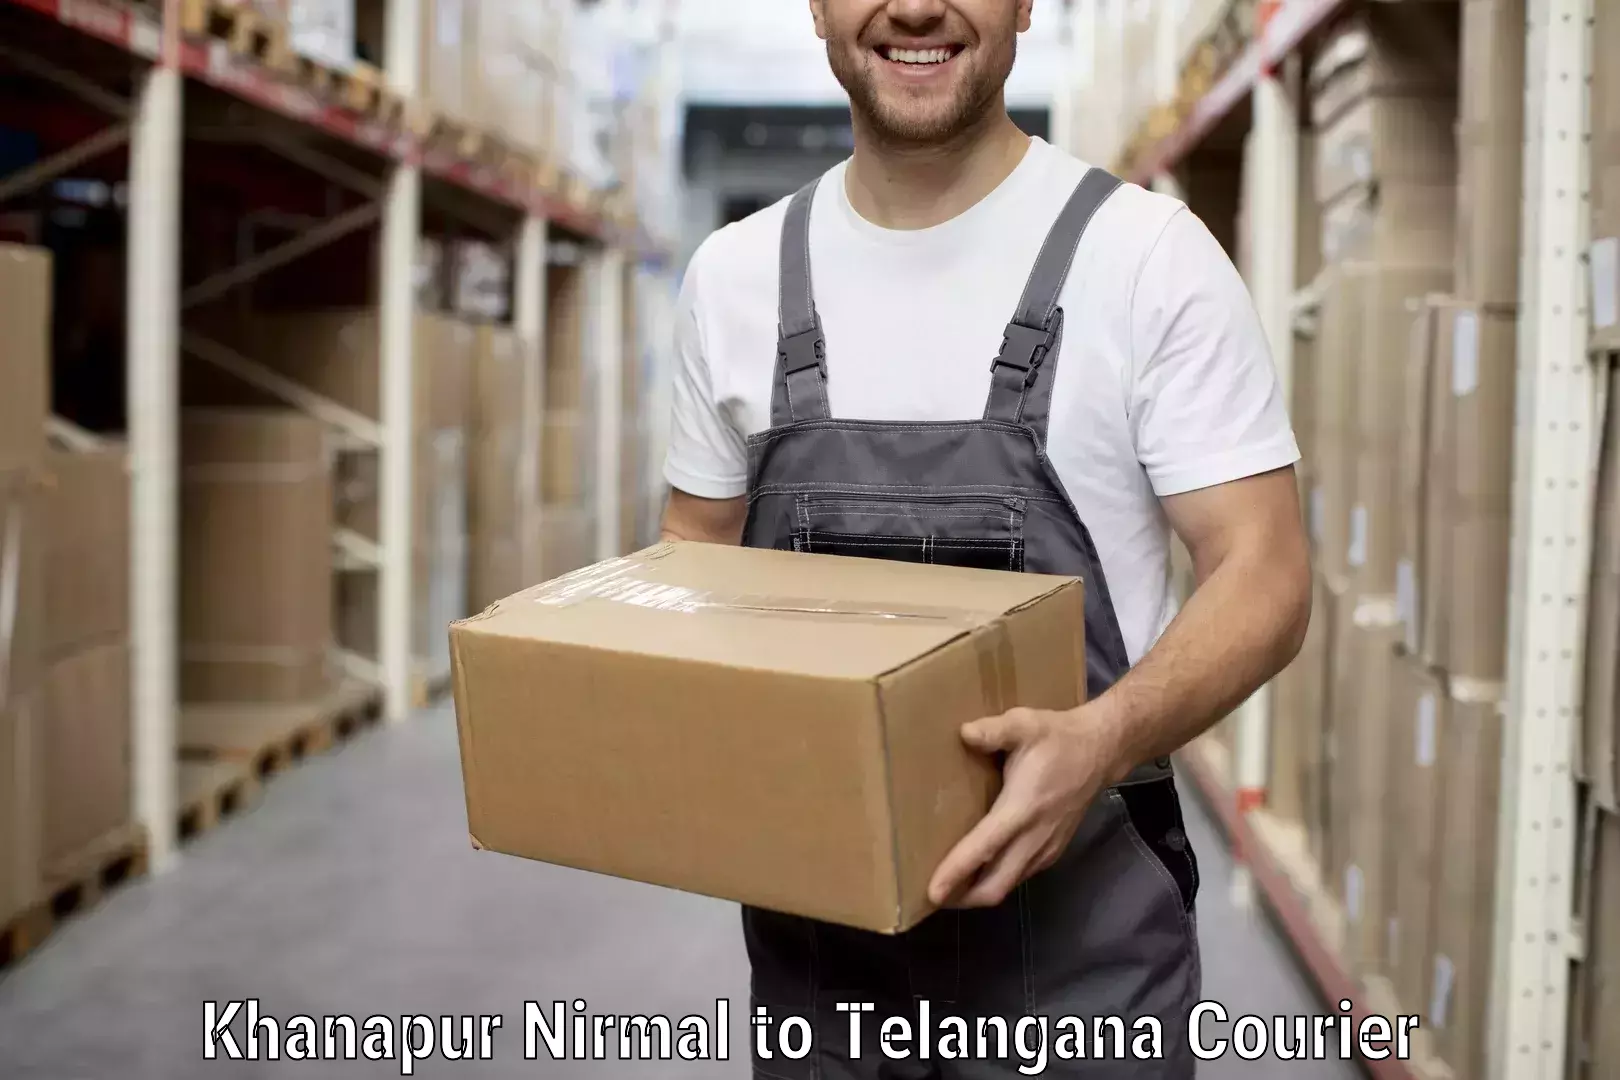 Quality relocation services in Khanapur Nirmal to Shankarpalle